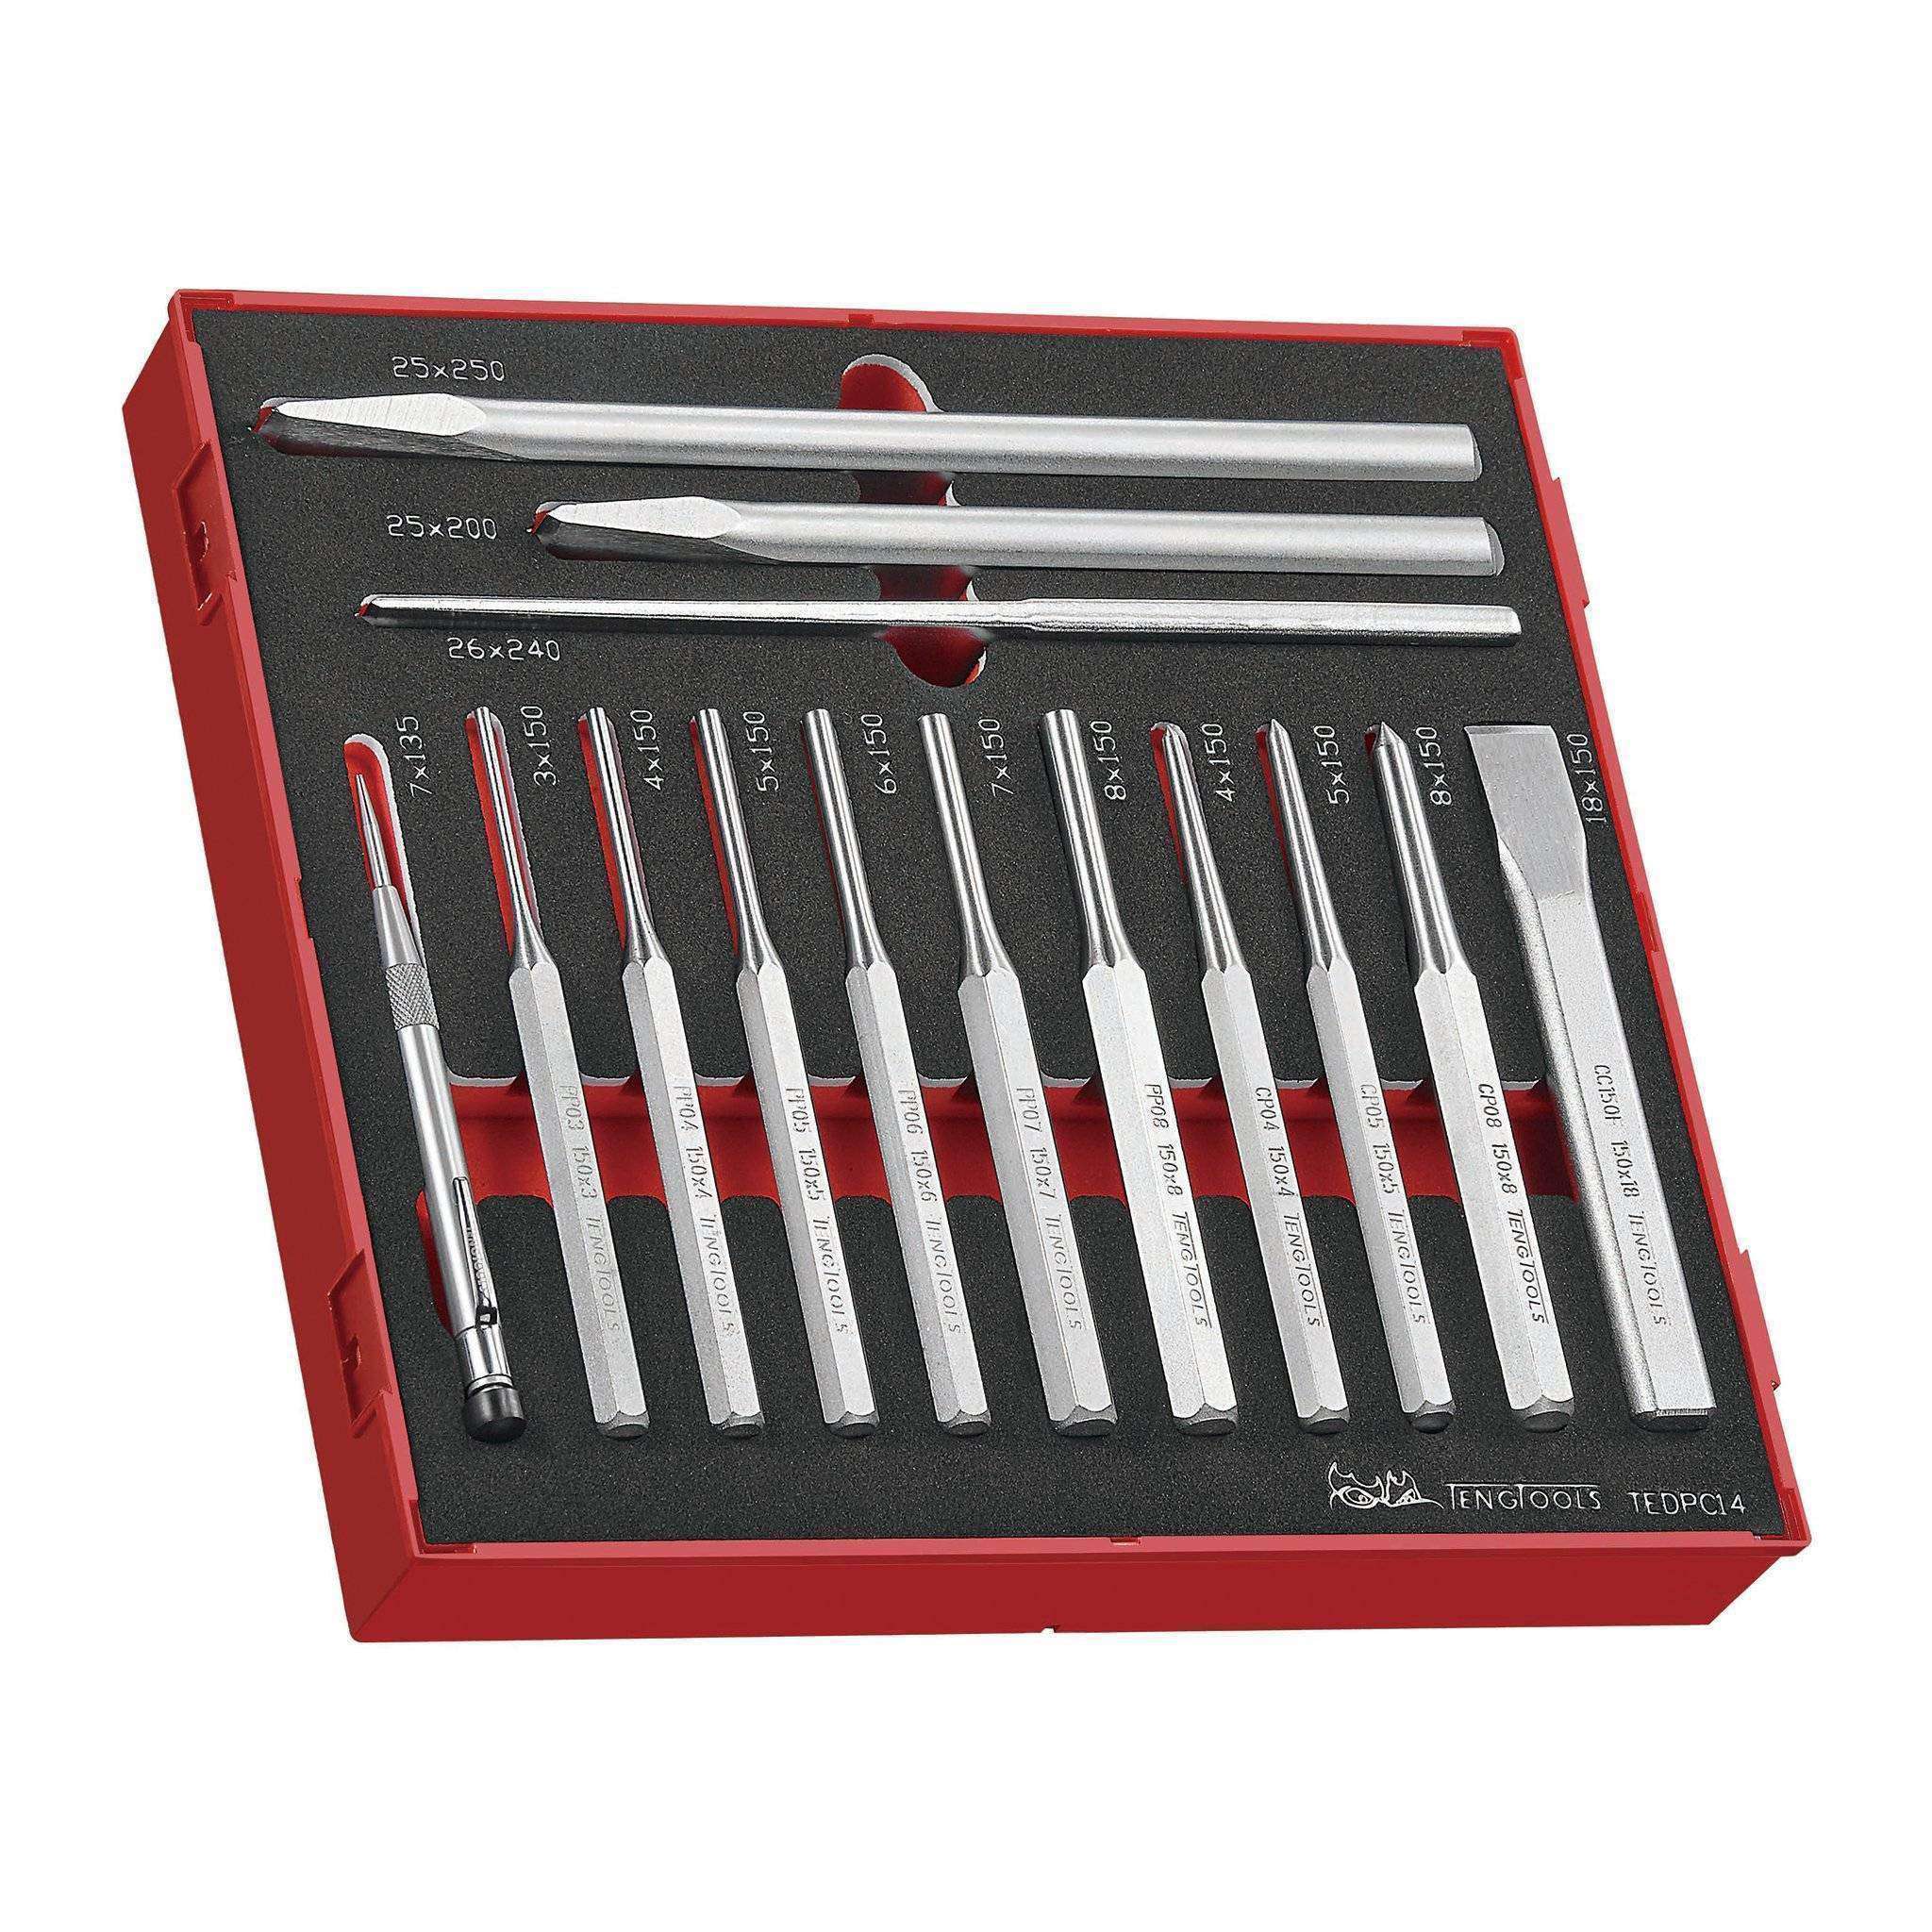 Teng Tools 14 Piece Parallel Pin Punch, Flat Cold Chisel And Centre Punch Foam Set - TEDPC14